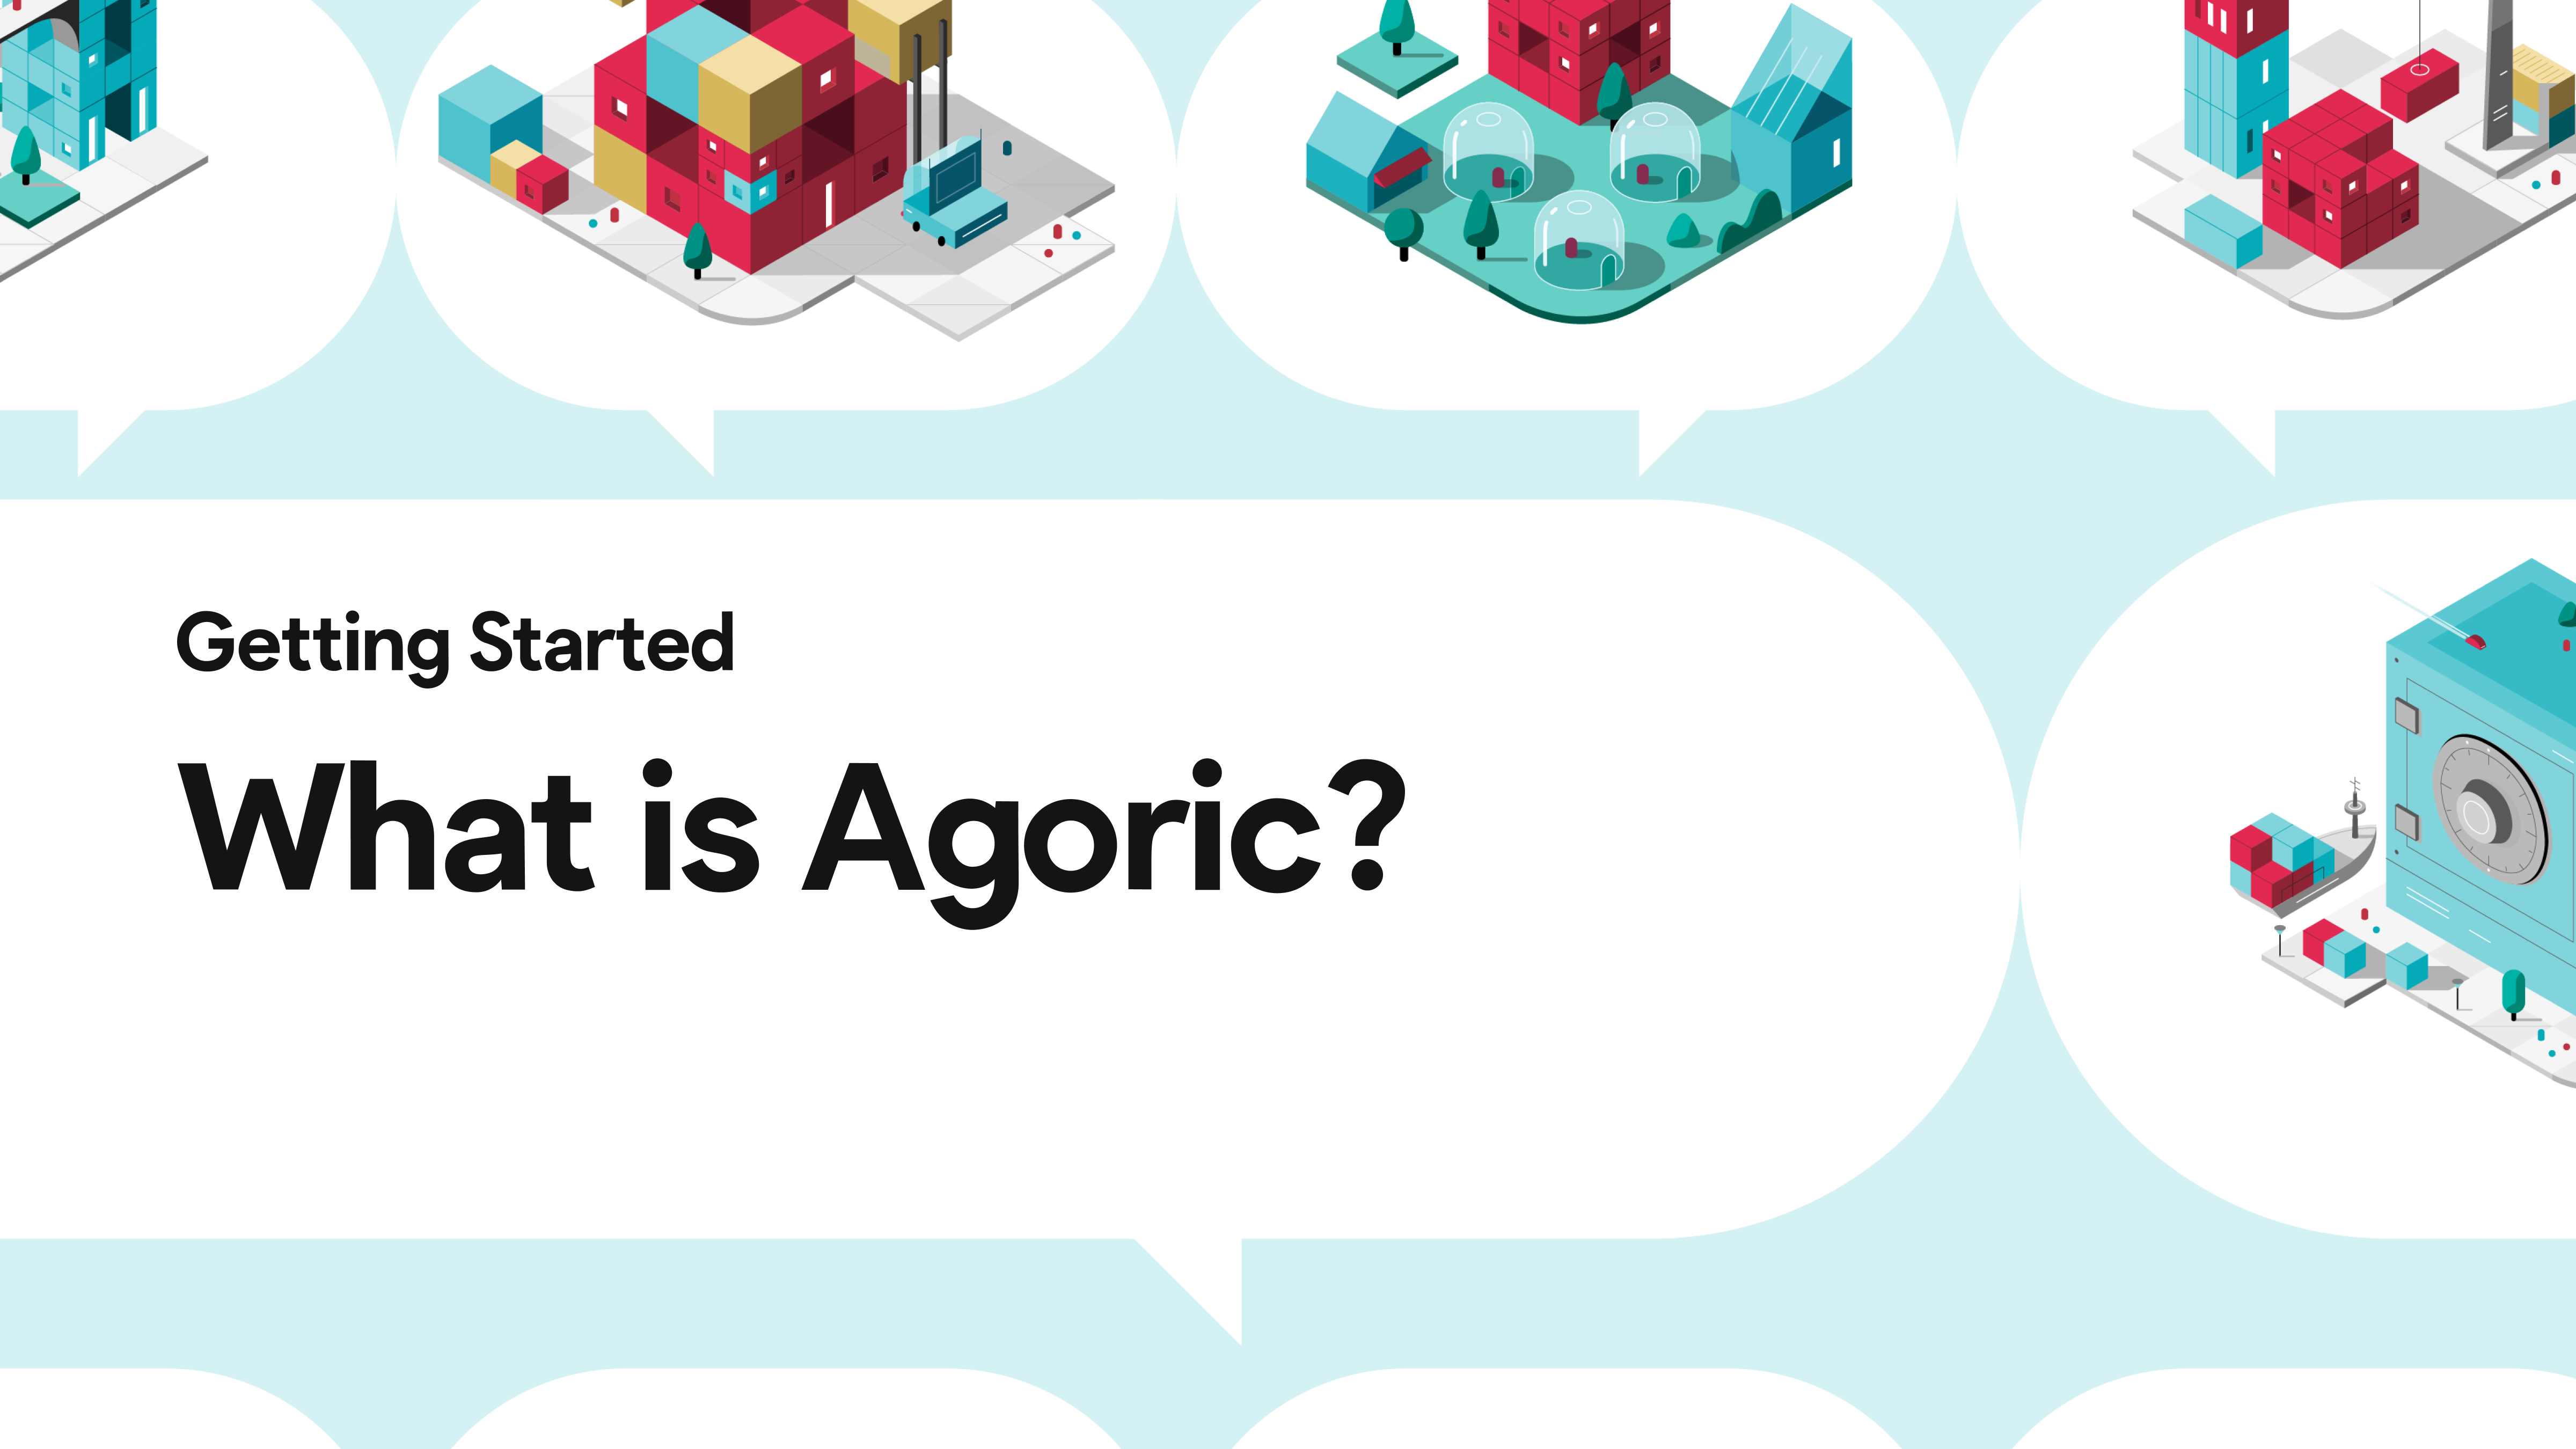 Getting Started with Agoric, a JavaScript Platform for Web3